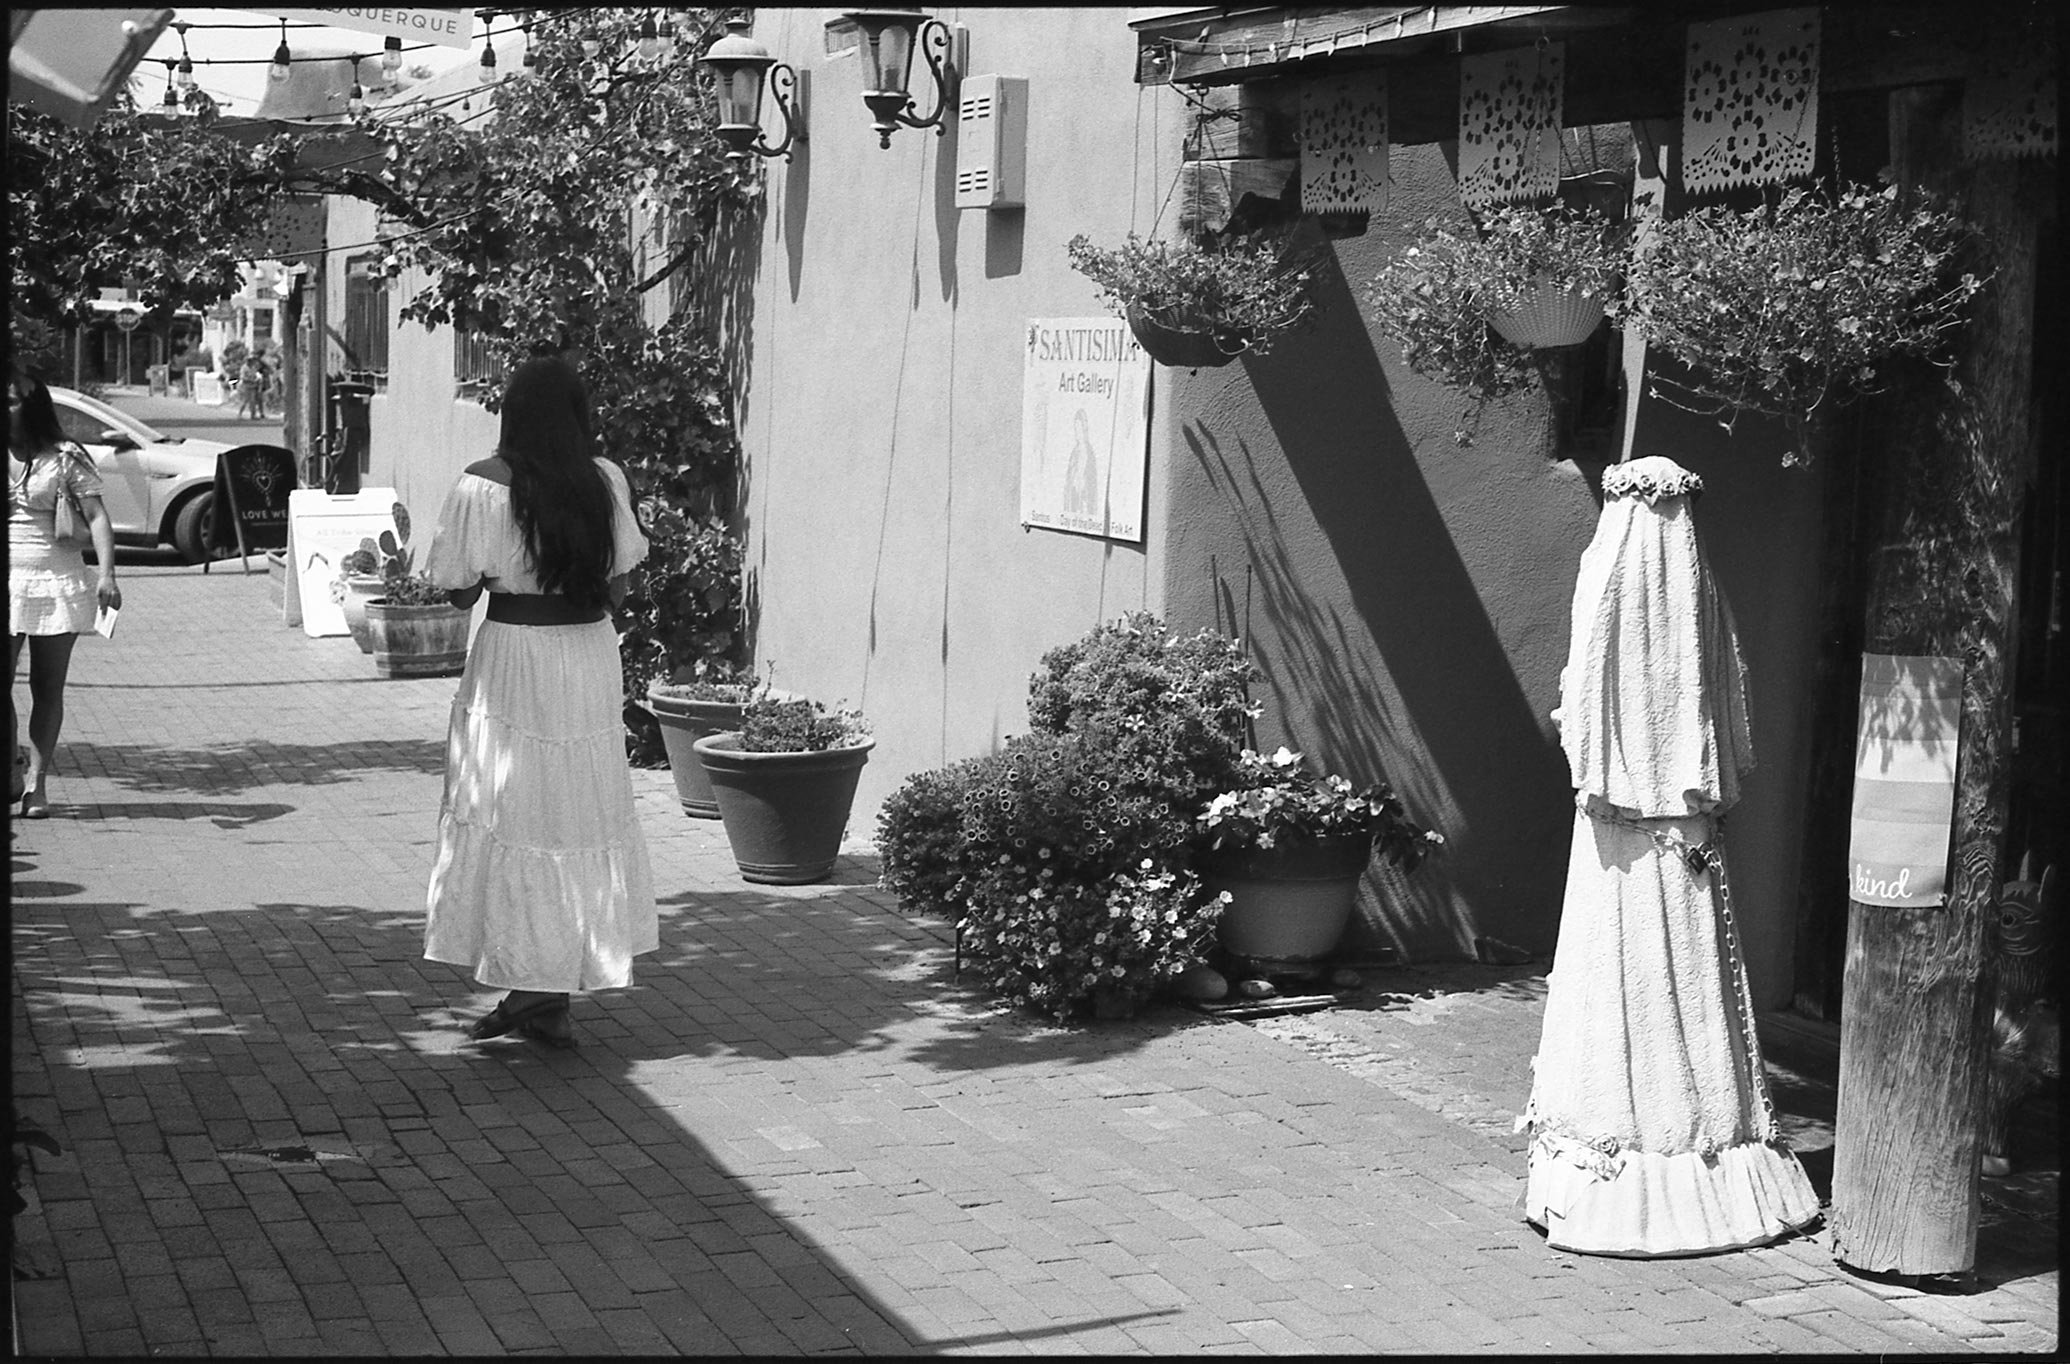 3 Figures in White, Old Town, Albequerque NM, 2022